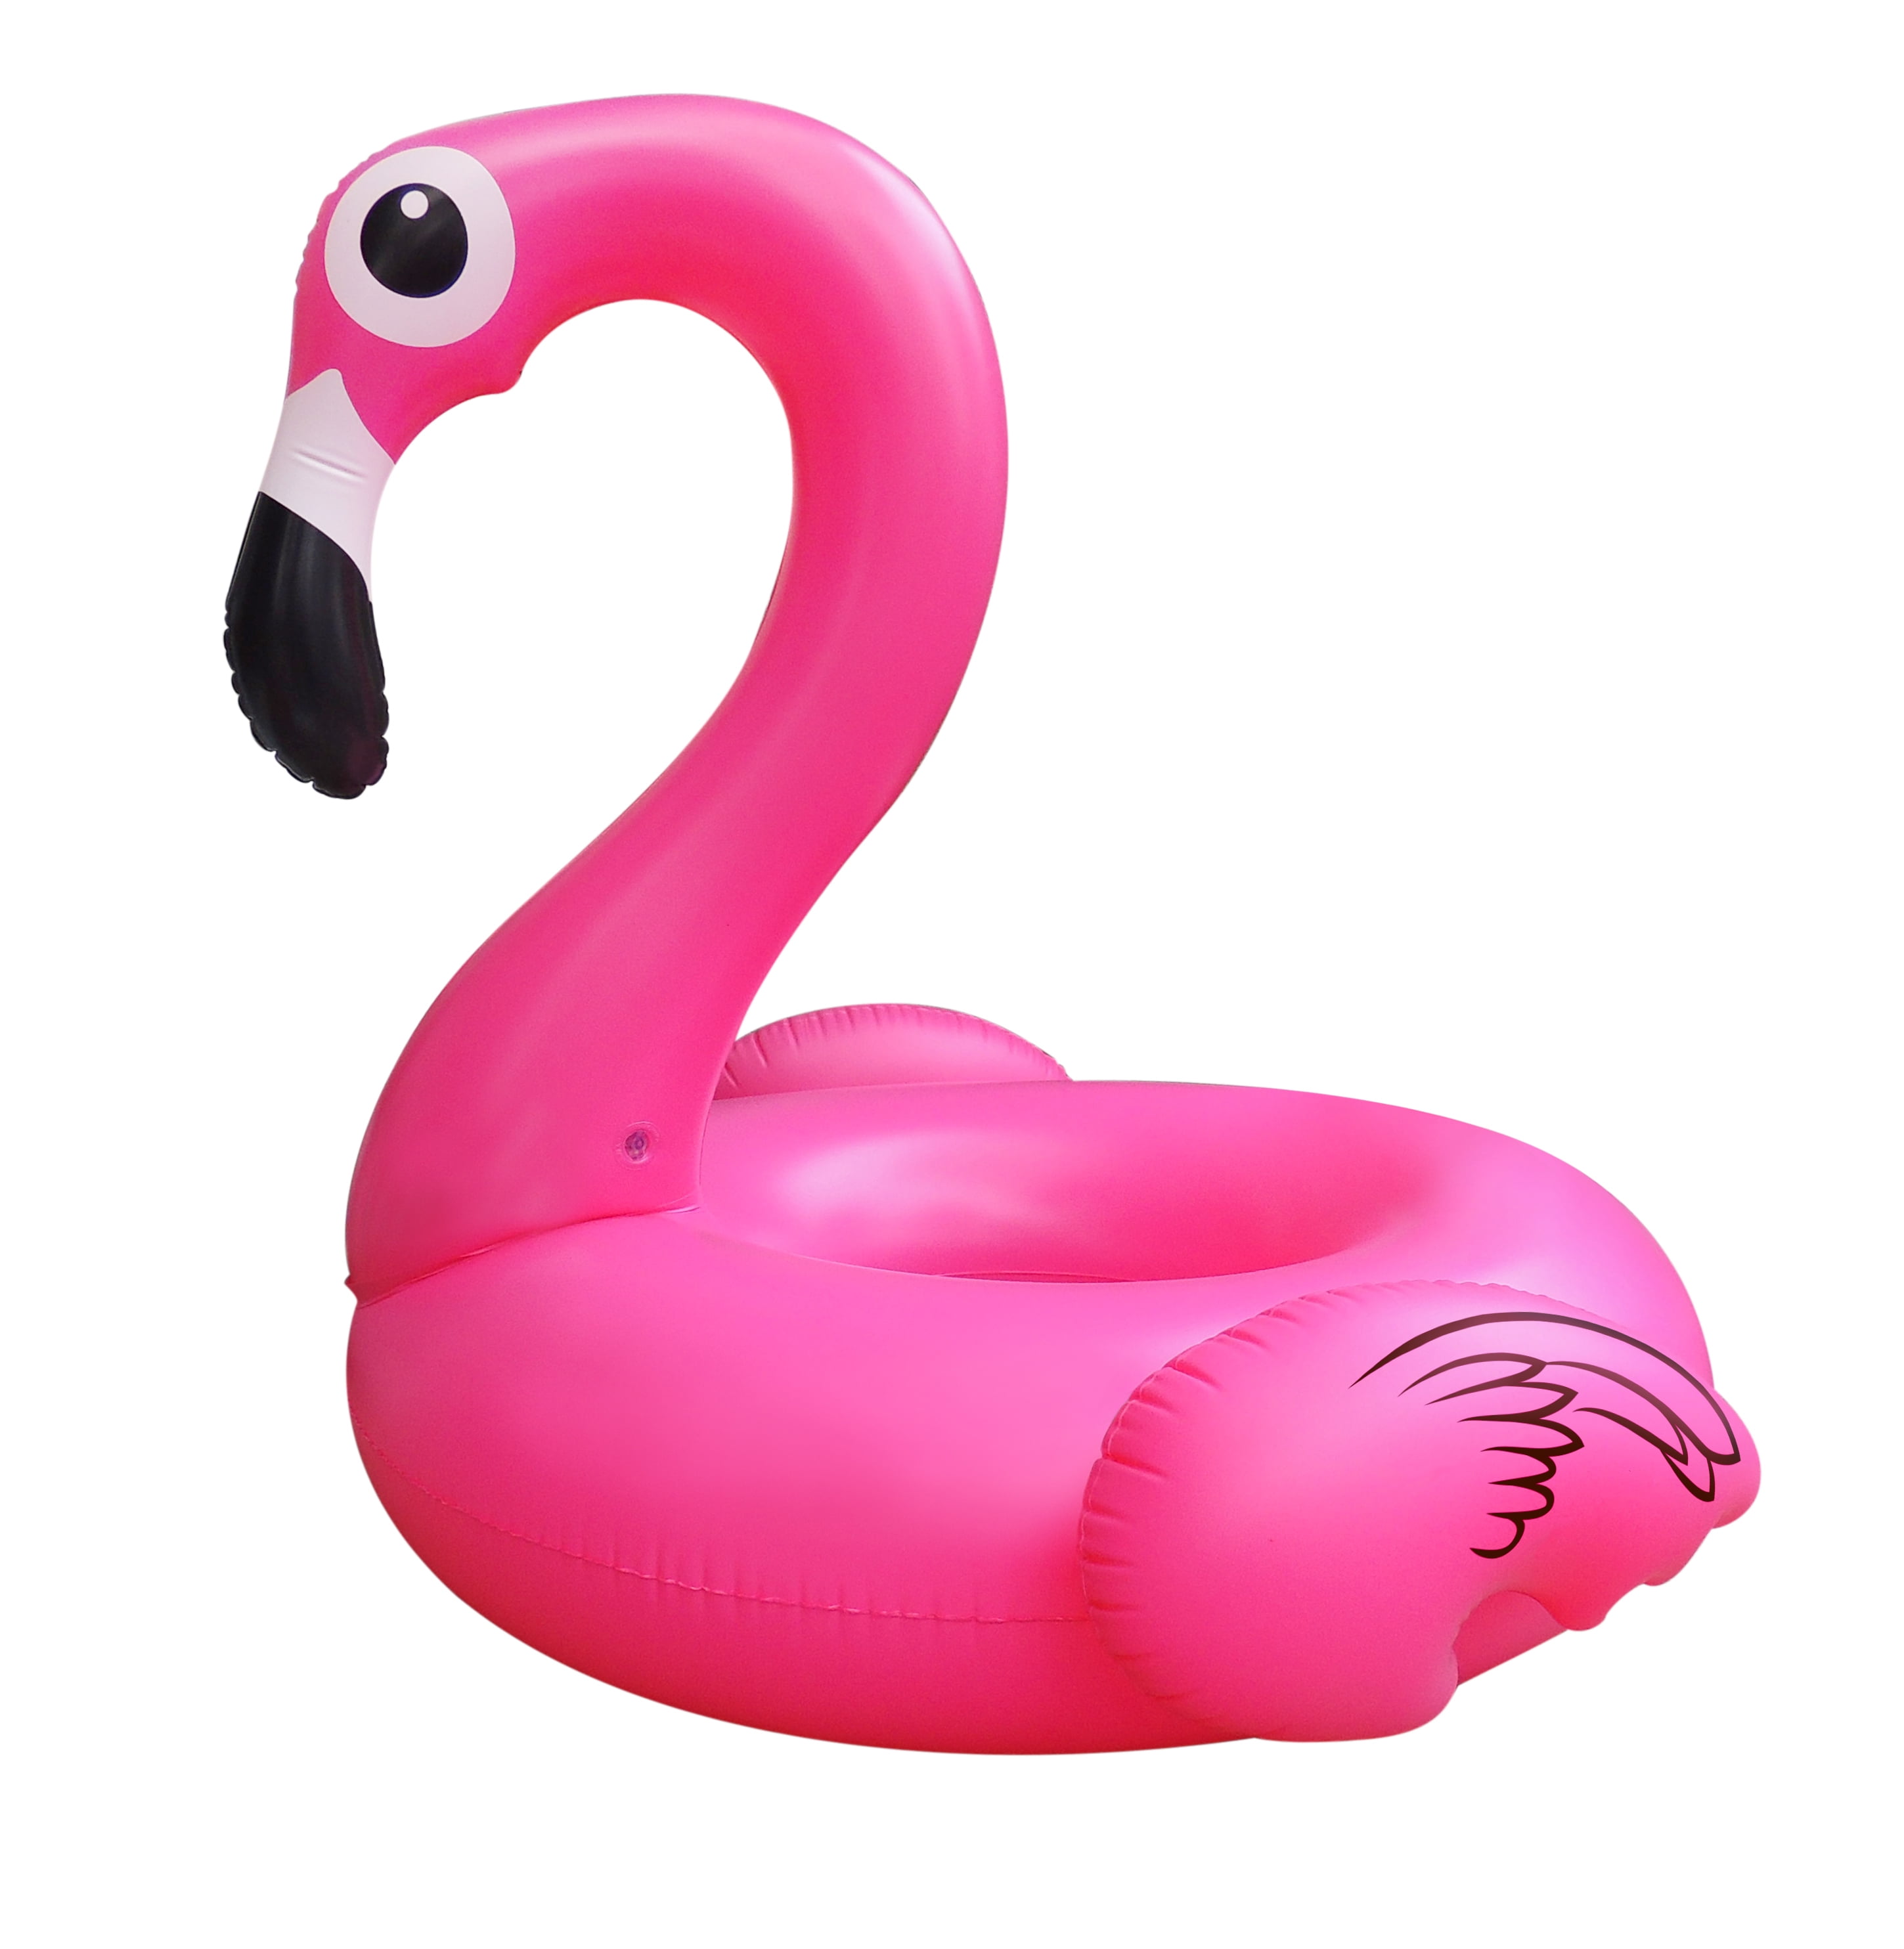 106" Giant Inflatable Flamingo Water Float Raft Ride On Pool Lounger Beach Toy 